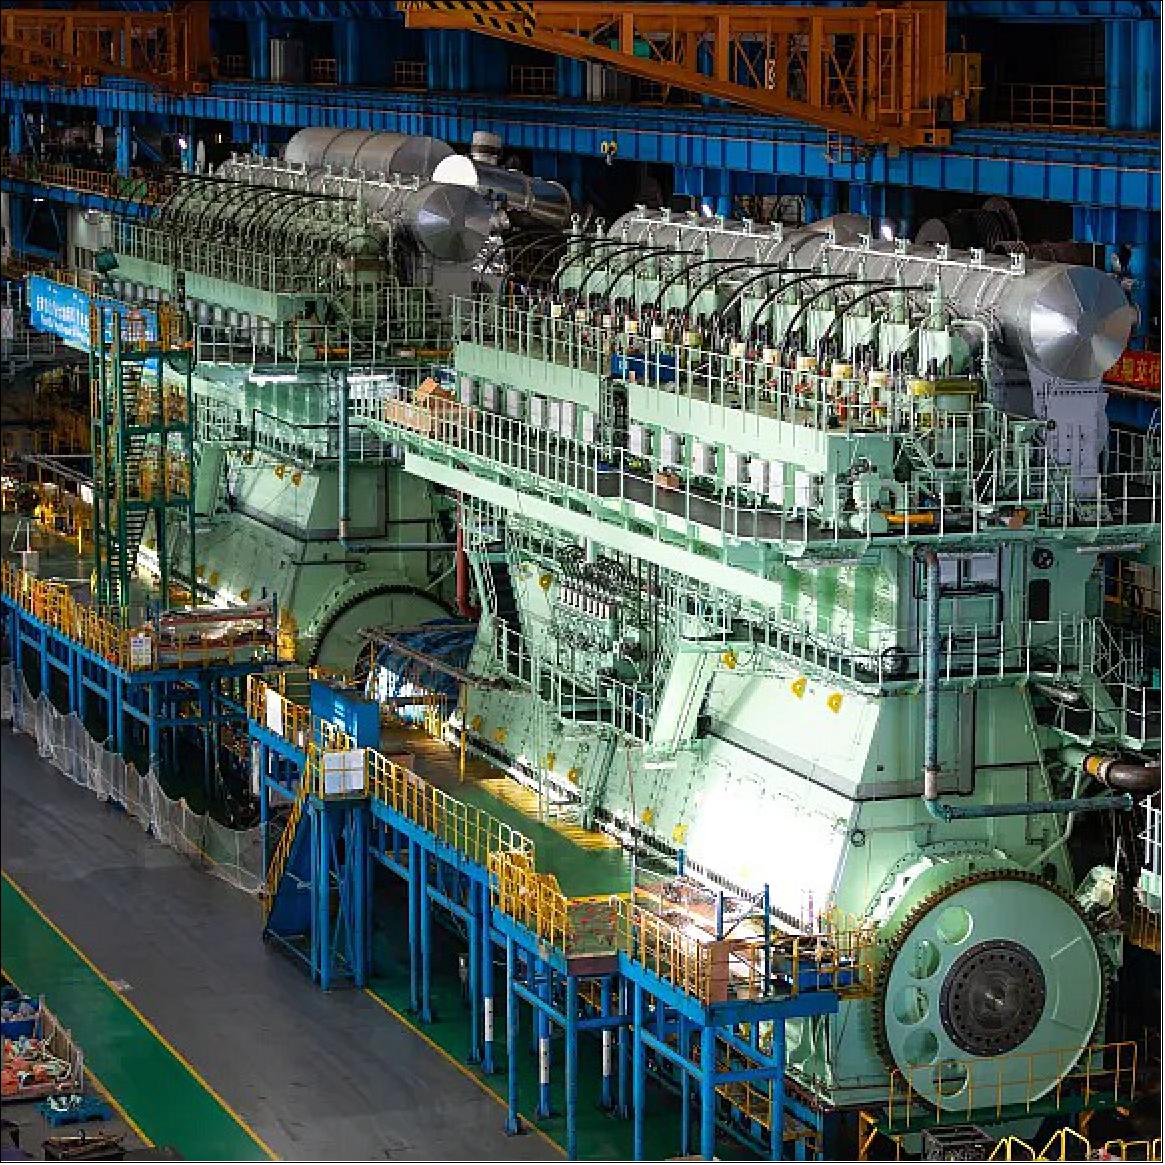 Figure 66: PIL has ordered WinGD X92DF-2.0 dual-fuel ammonia-ready engines (image credit: VPO Global)